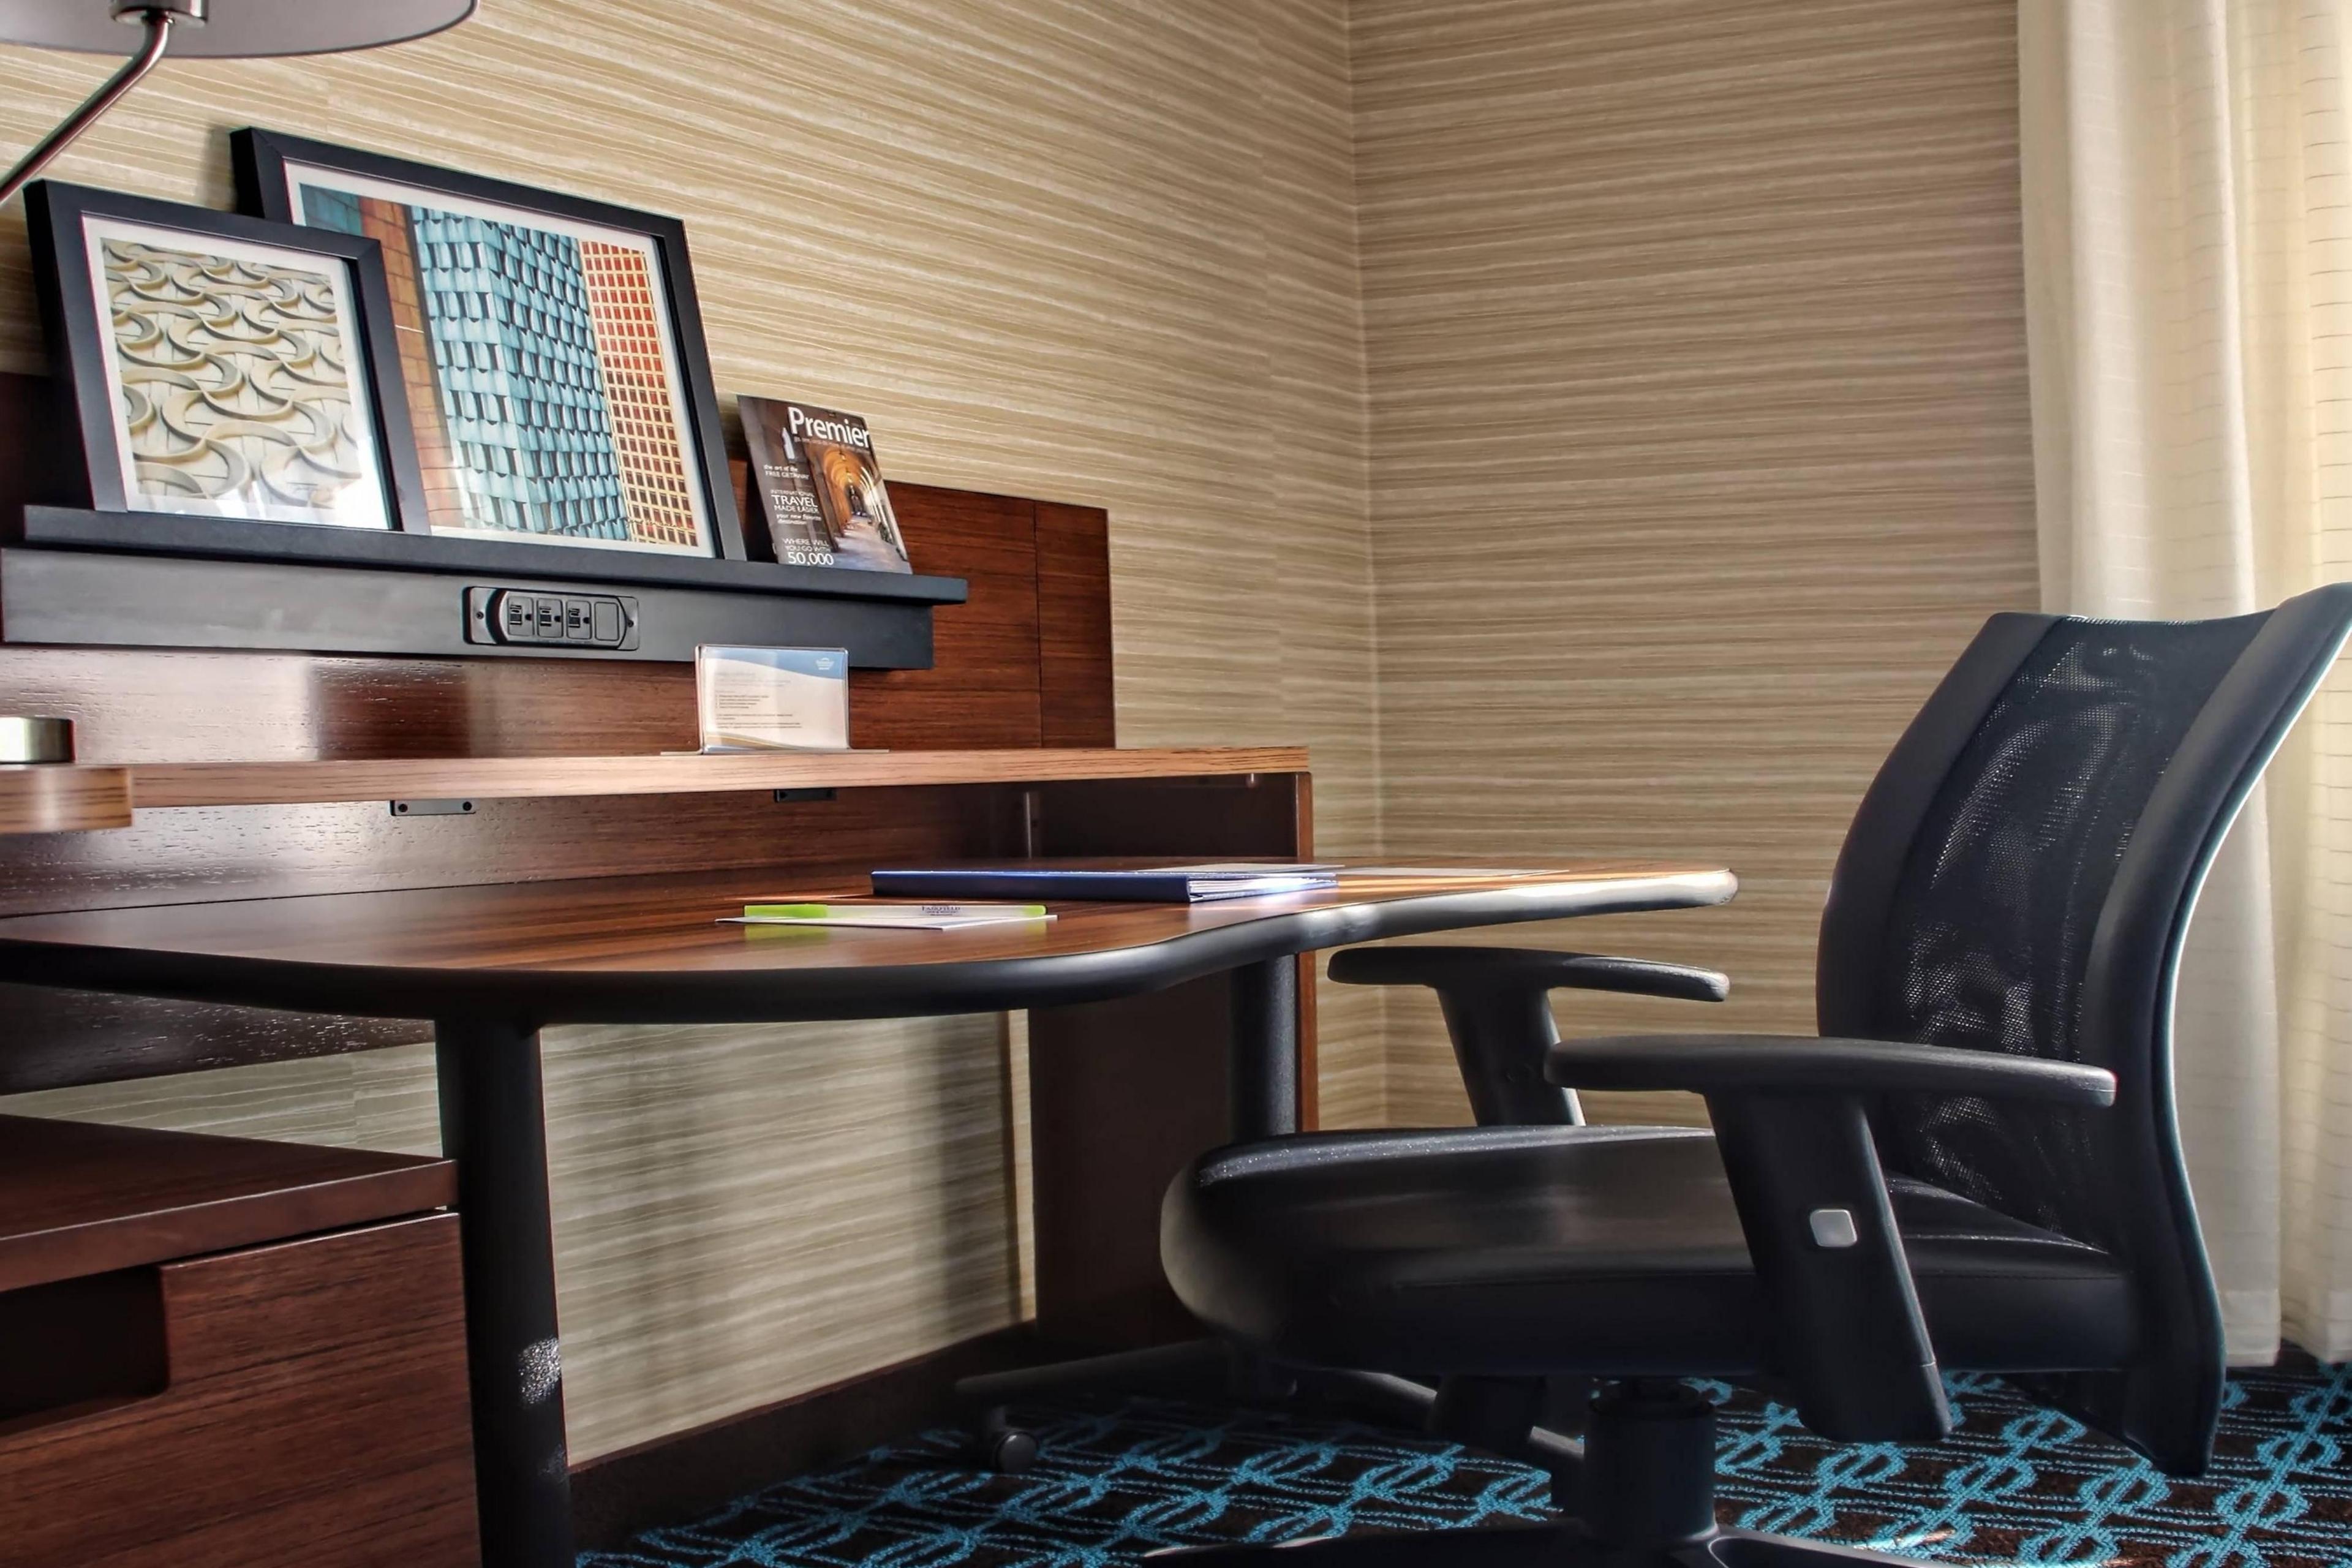 Our in-room desks are spacious and mobile. Ability to roll the desk closer to the television to watch your favorite show or closer to the bed to have a more comfortable seat.